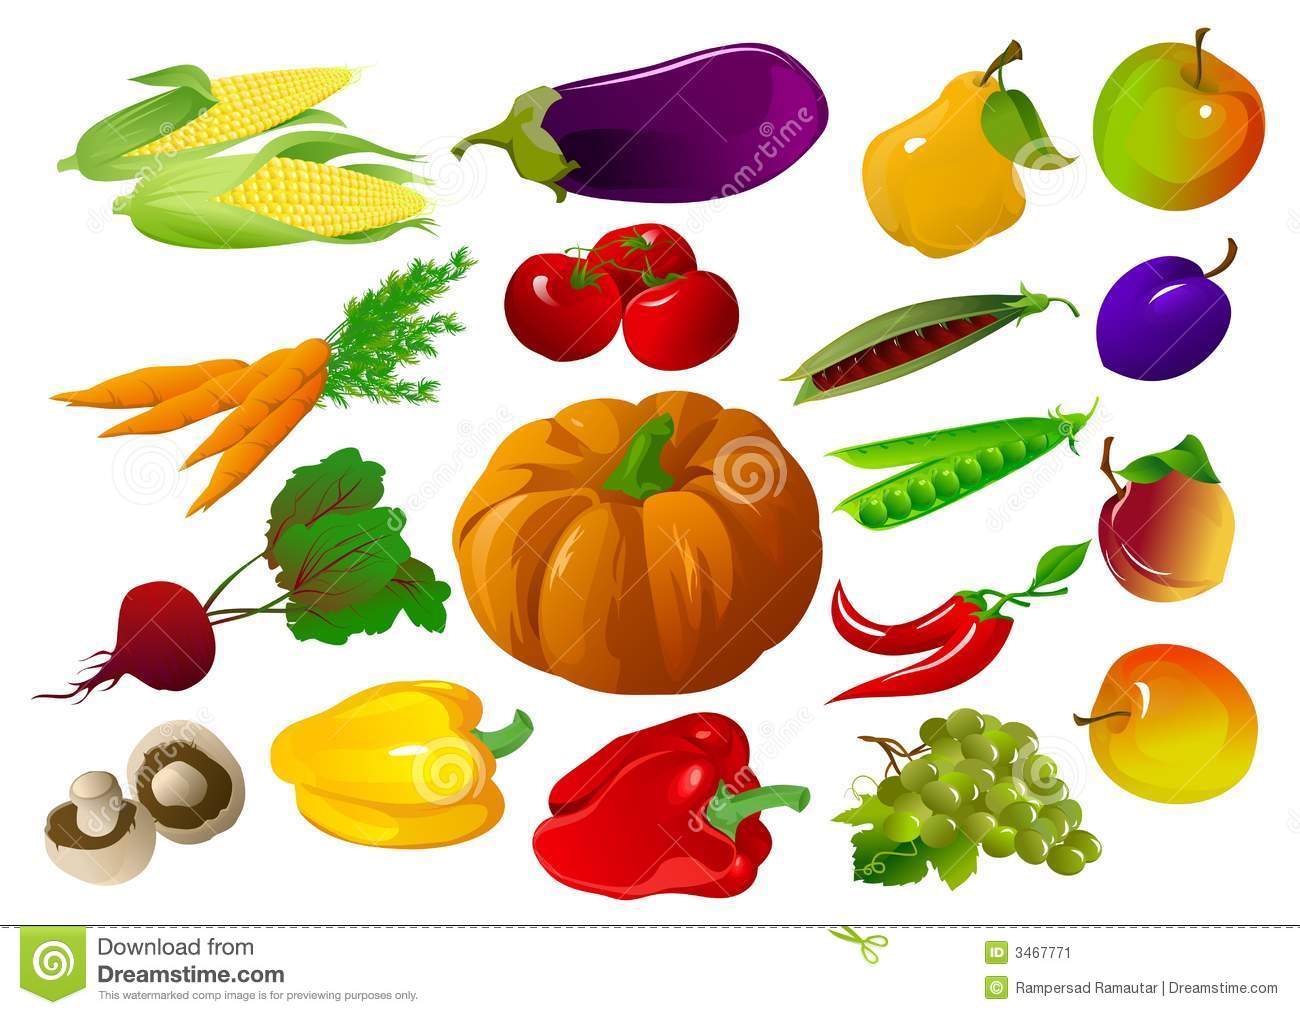 Vegetables Stock Illustrations Vectors Clipart u2013 26164 Stock Image source  from this